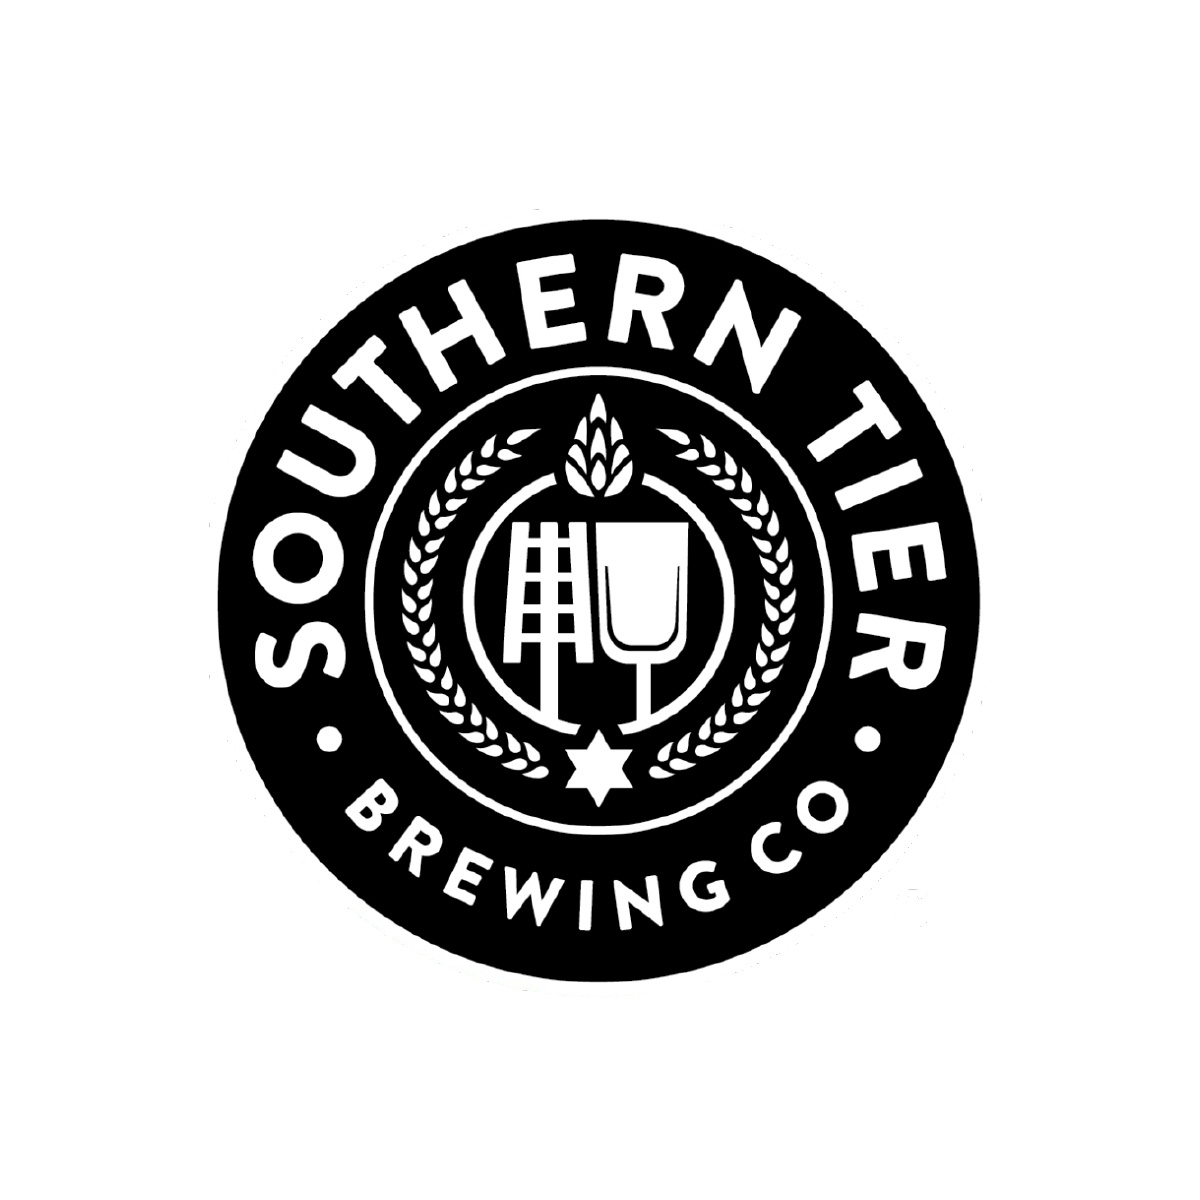 Southern Tier